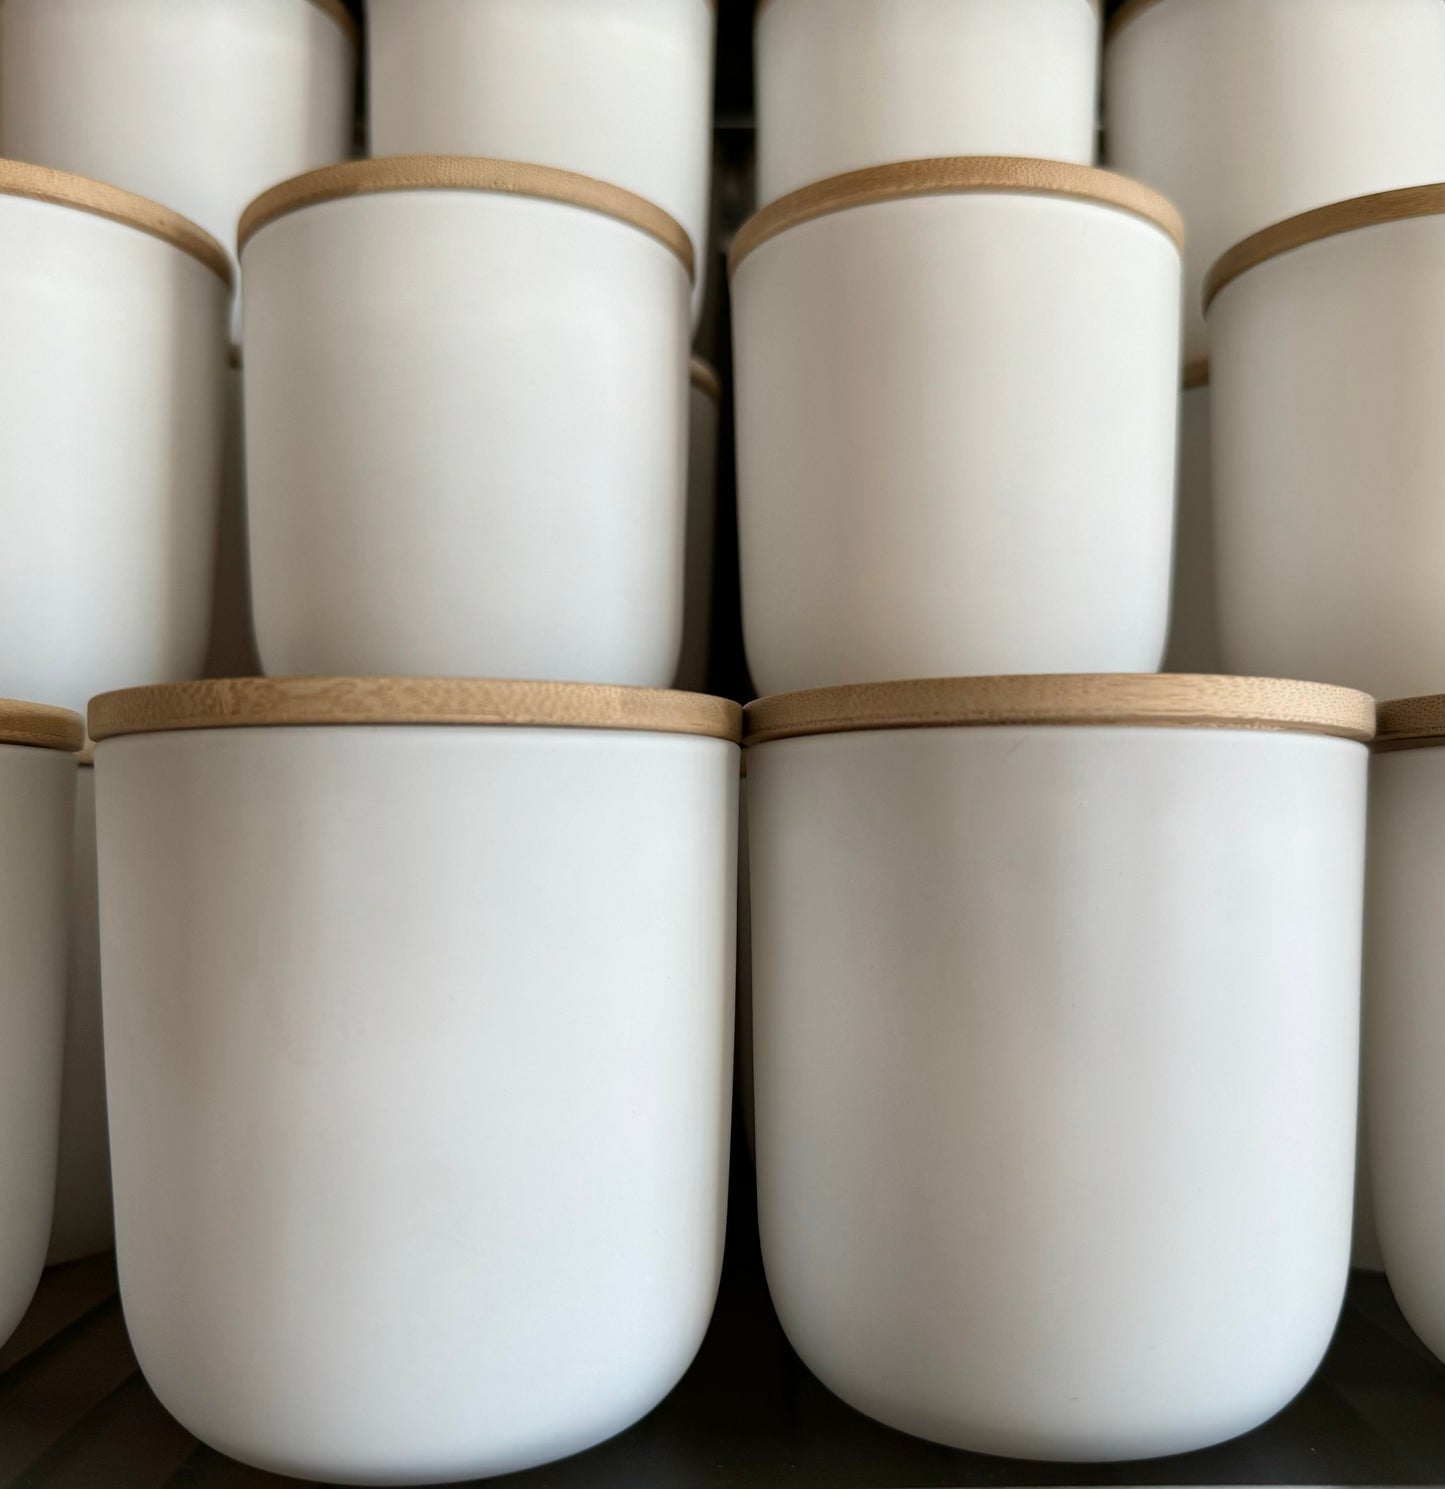 10oz White Candle Jars for Private Label